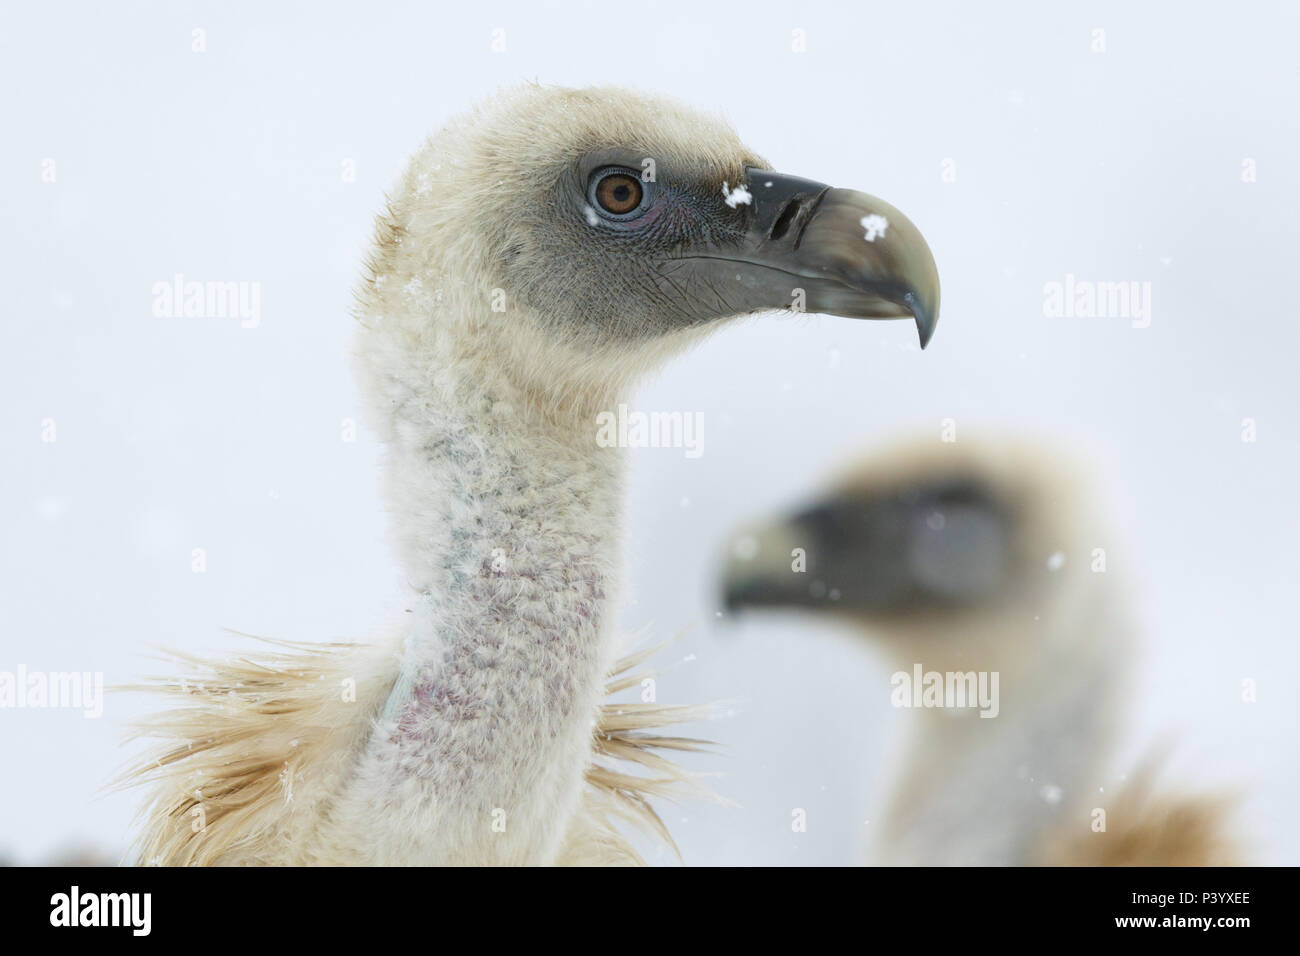 Vultures in the snow. Wildlife. Stock Photo